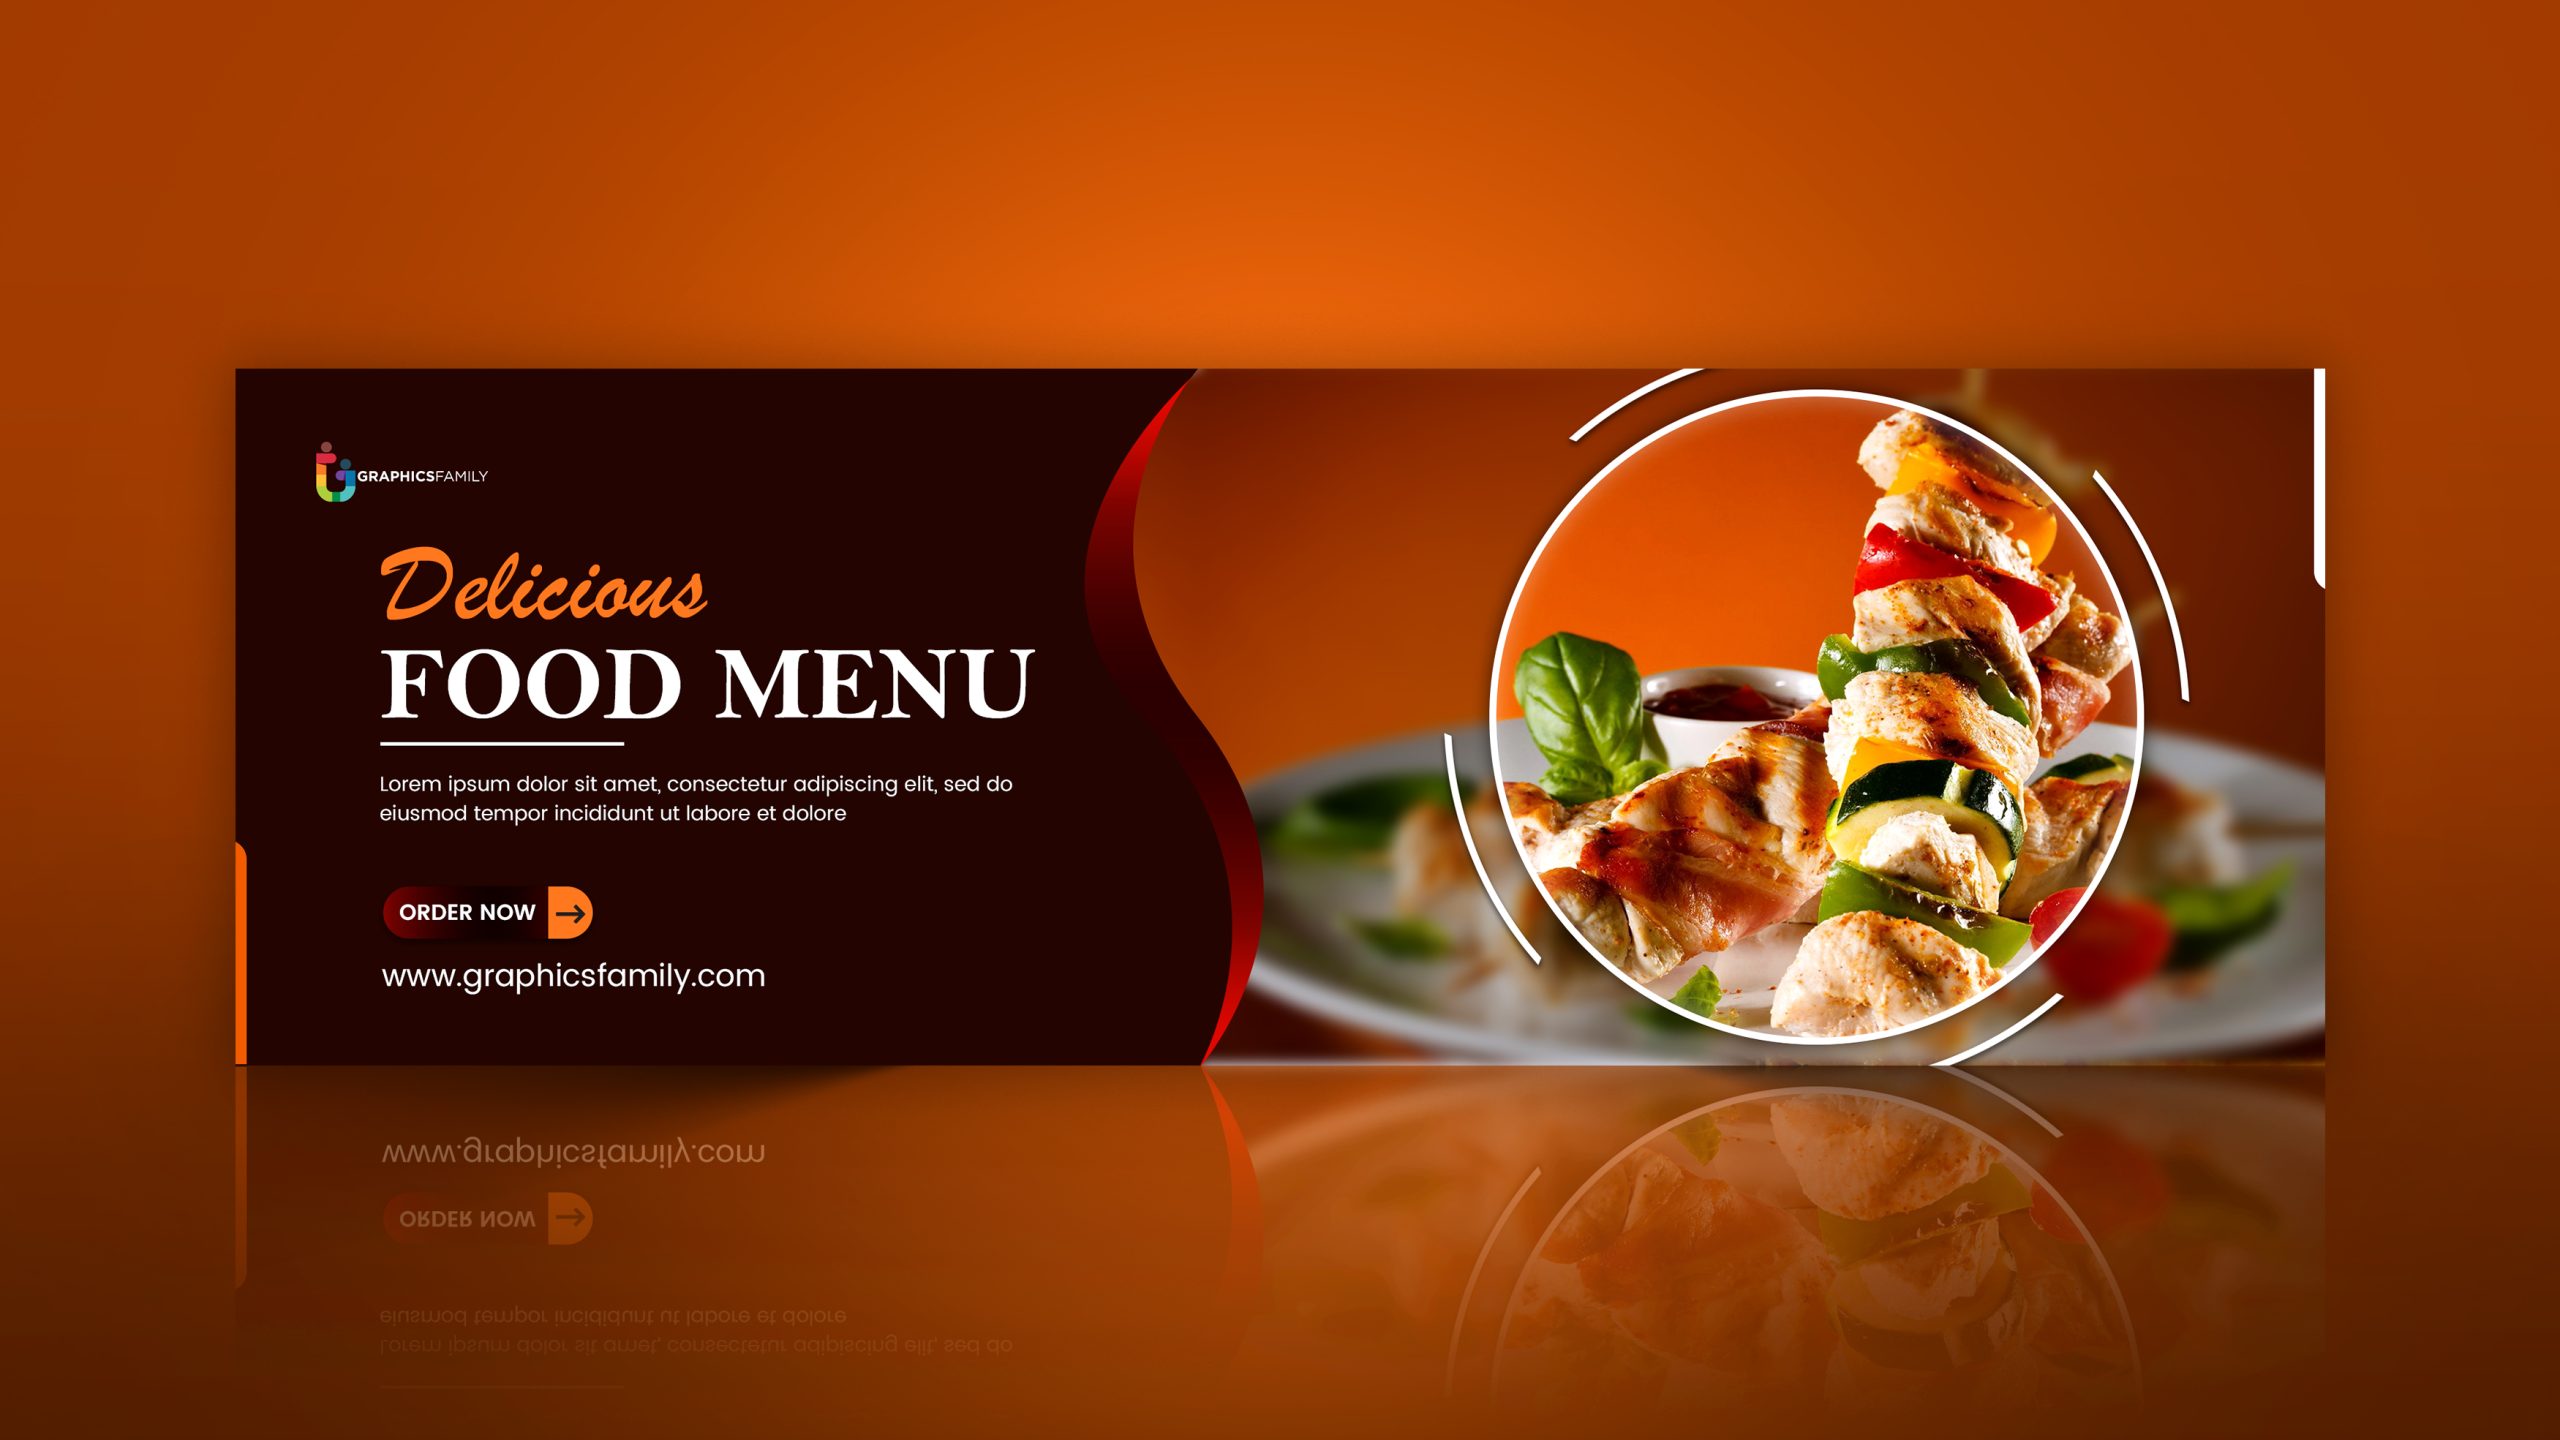 Food Poster Maker: Create Food Poster Designs in Minutes